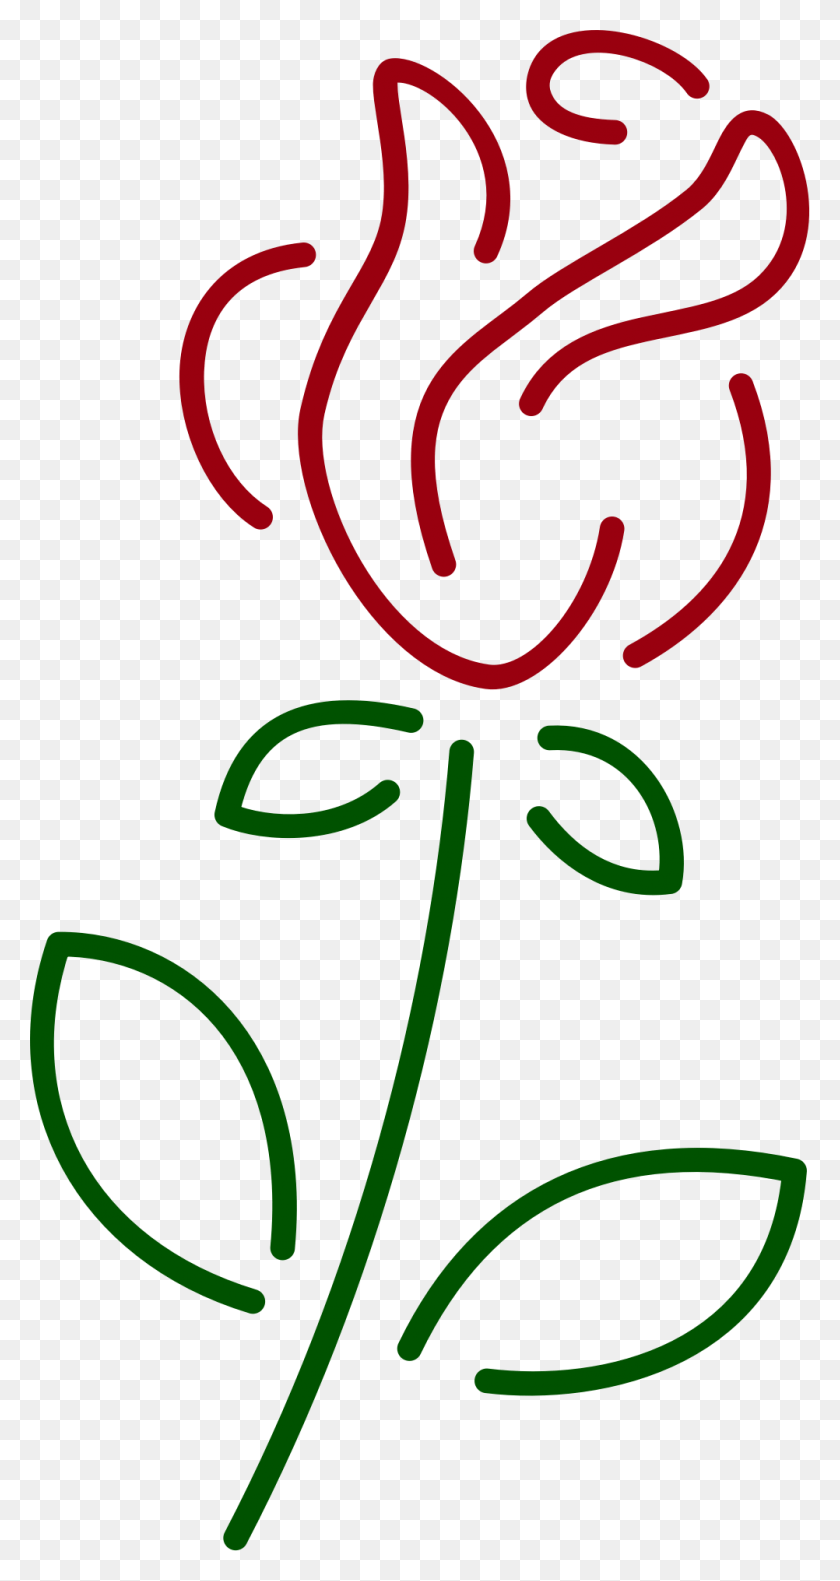 1002x1954 This Free Icons Design Of Line Rose Rose Line Art, Texto, Planta Hd Png